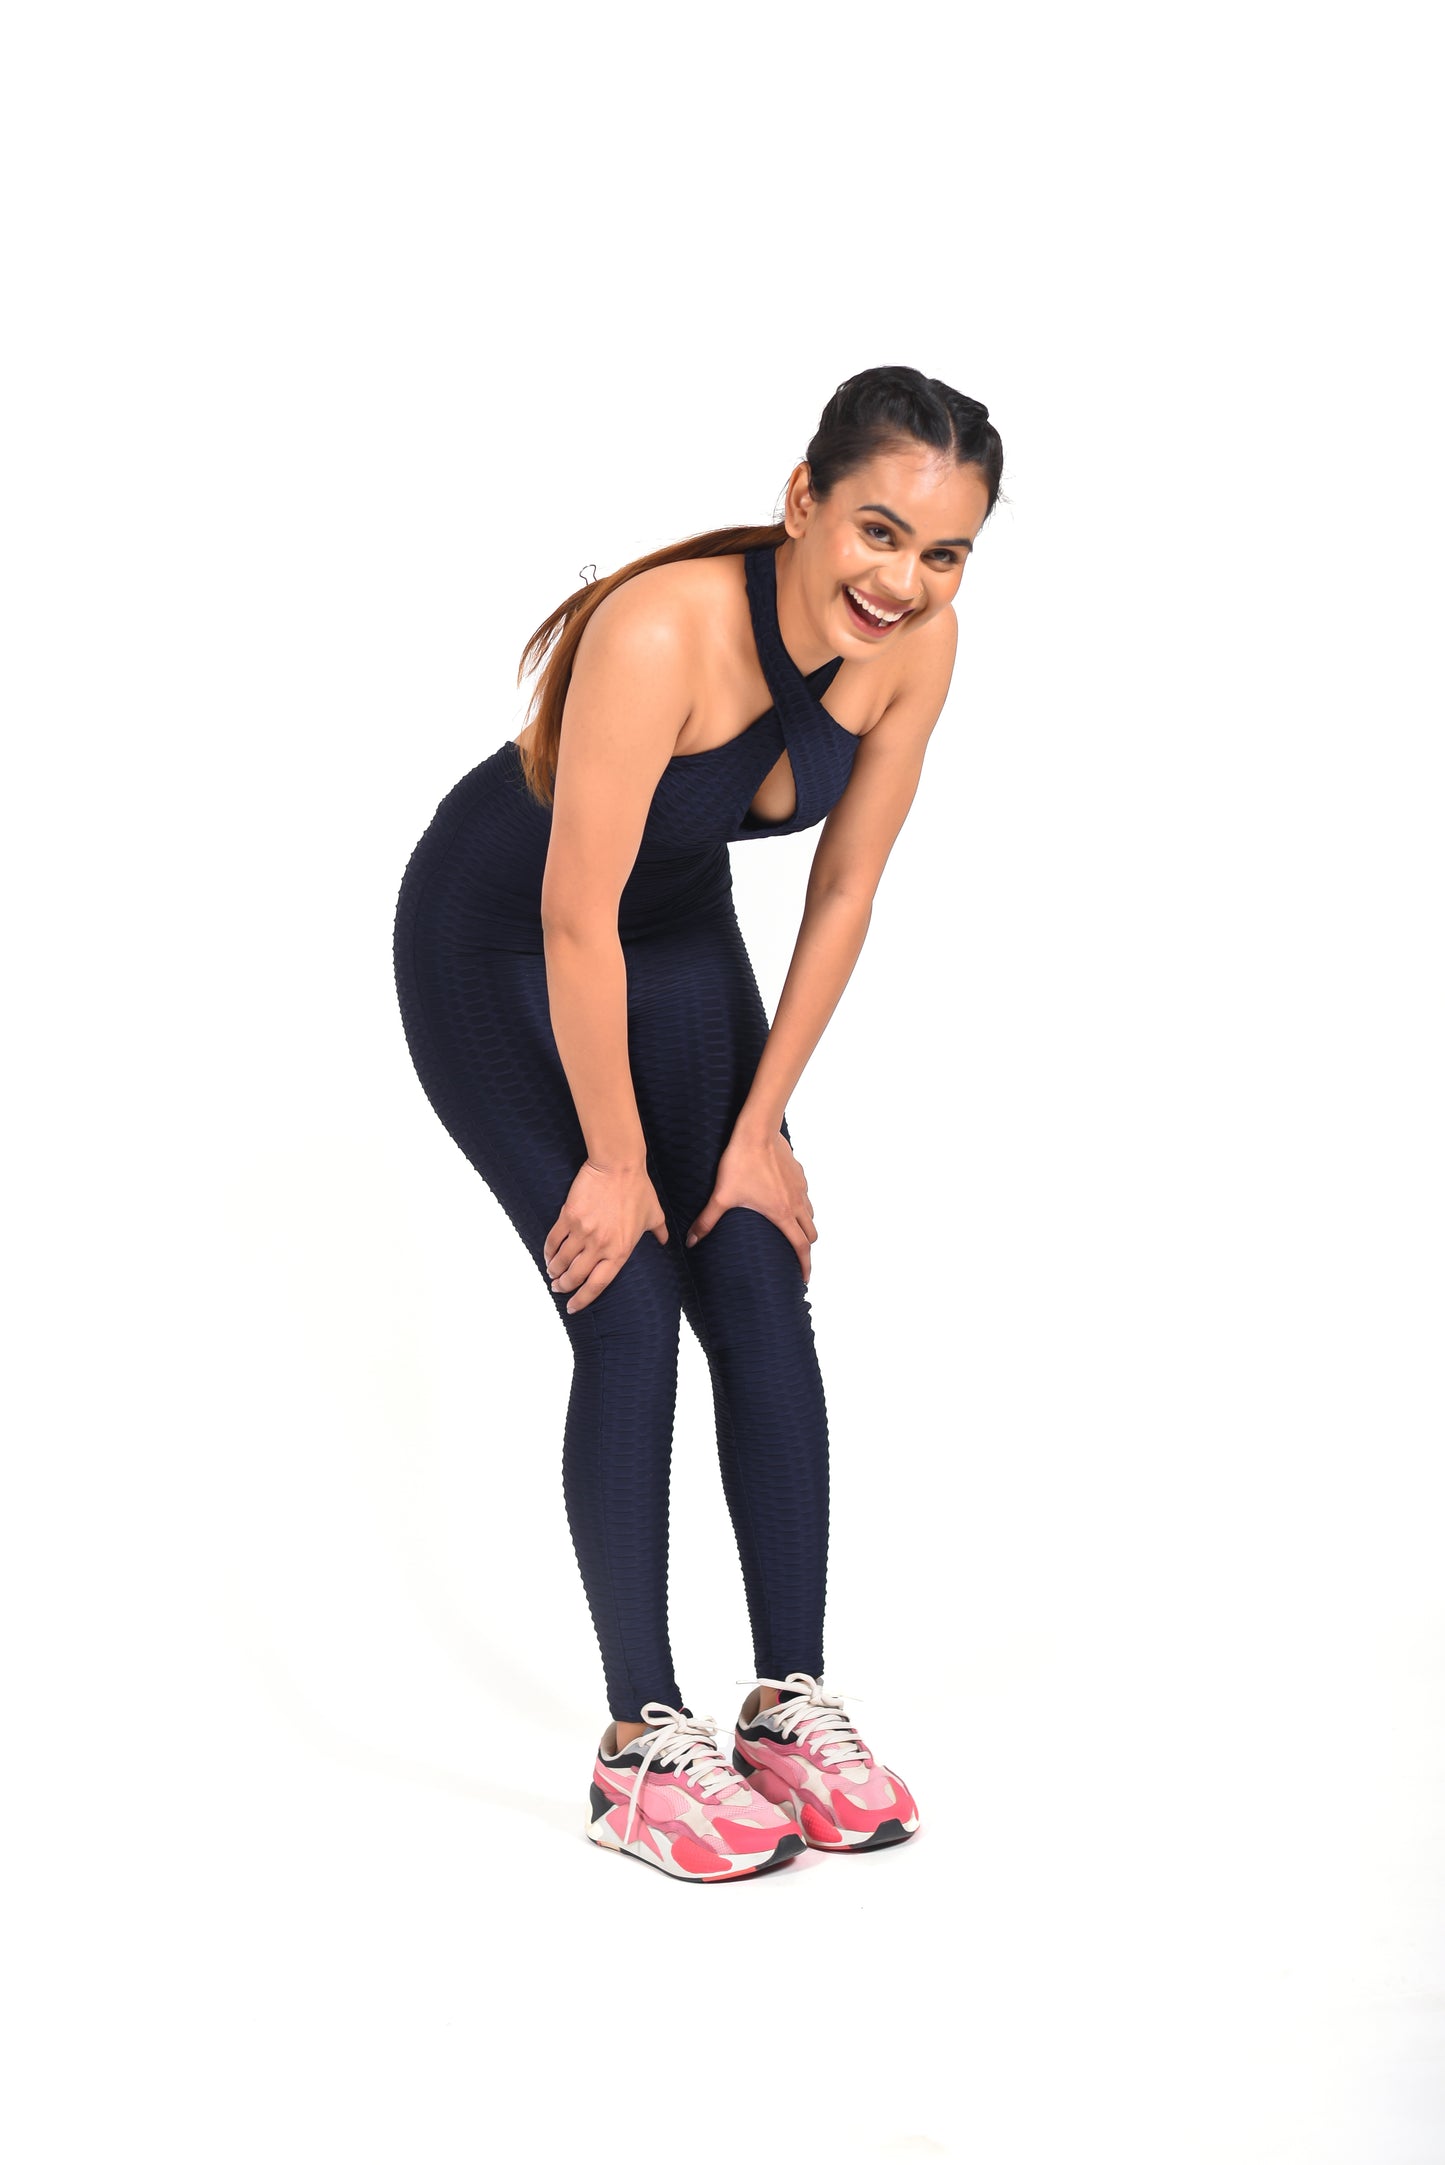 Load image into Gallery viewer, GYMSQUAD® ANTI-CELLULITE AND PUSH UP JUMPSUIT - NAVY
